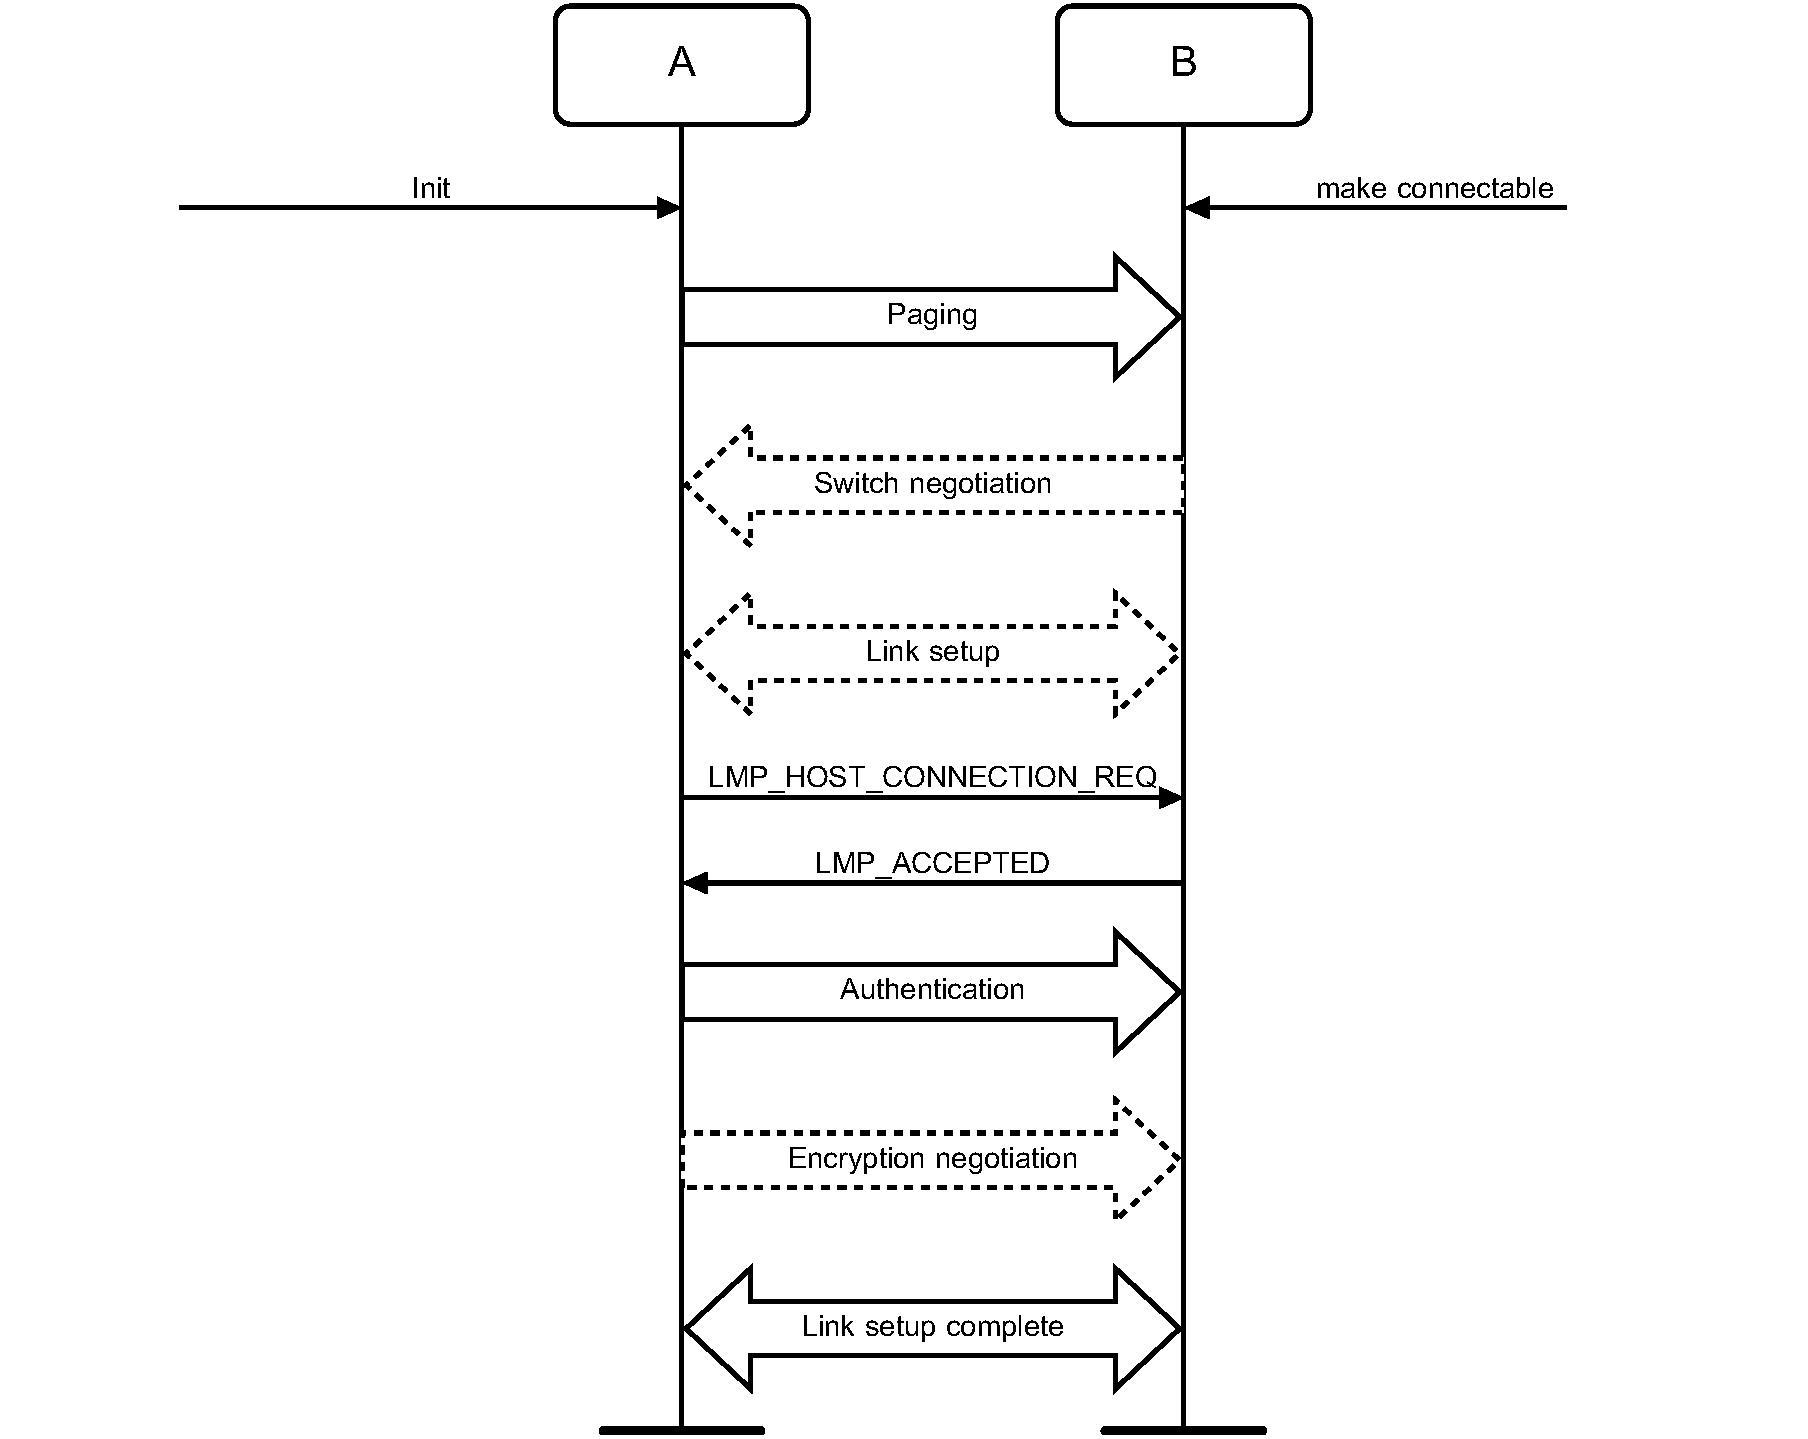 Link Establishment procedure when the paging device (A) is in security mode 3 and the paged device (B) is in security mode 1, 2, or 4